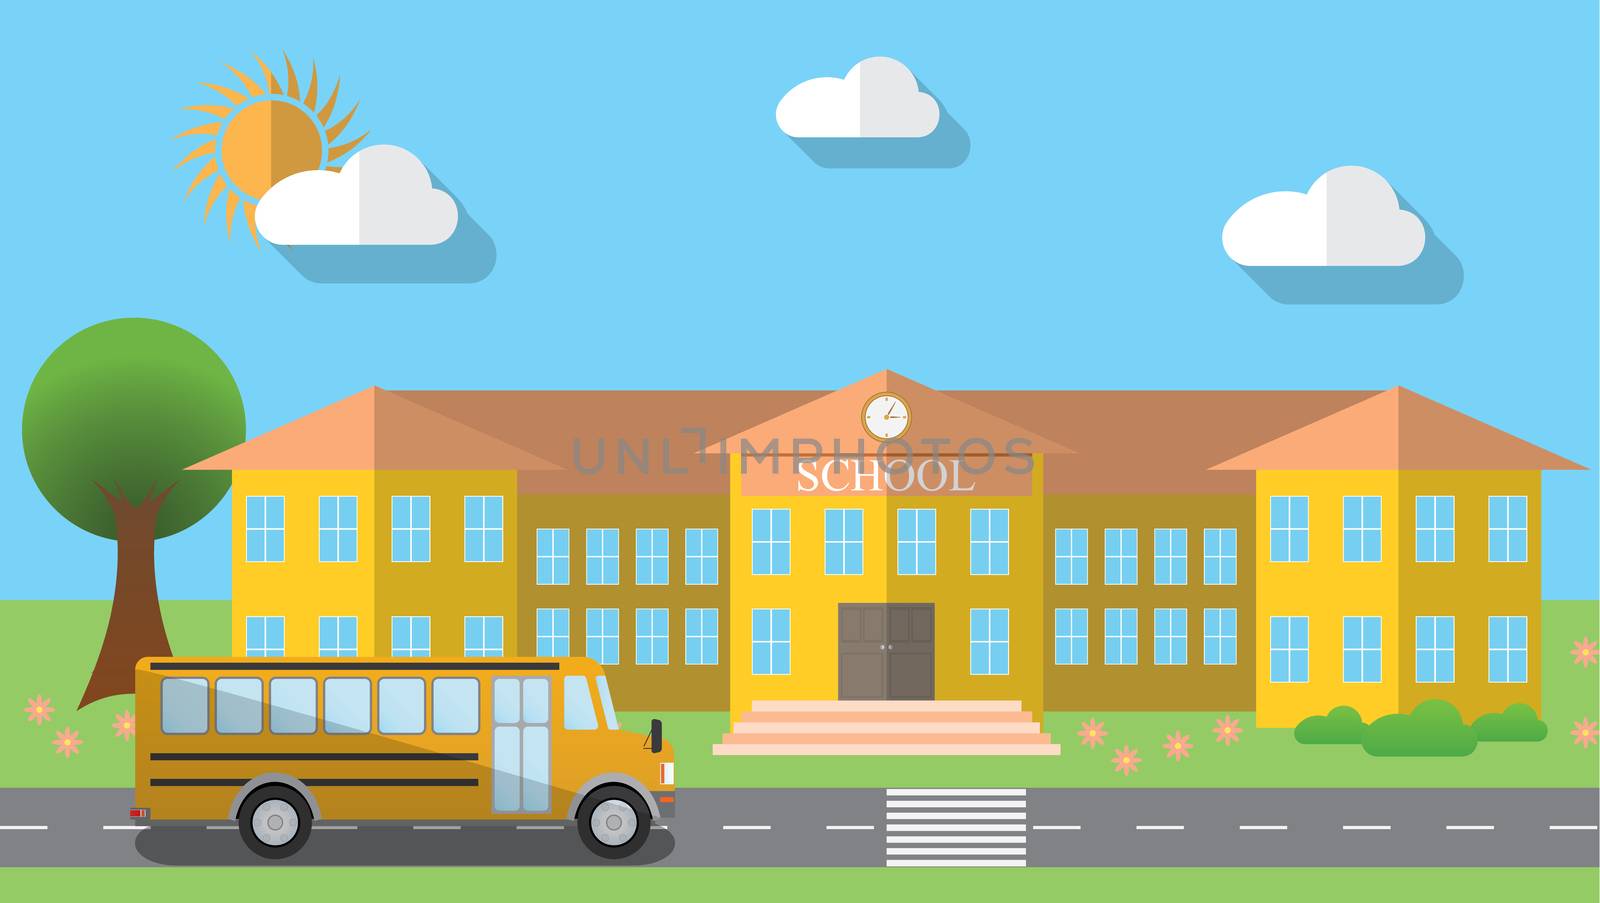 Flat design vector illustration of school building and parked school bus in flat design style, vector illustration.